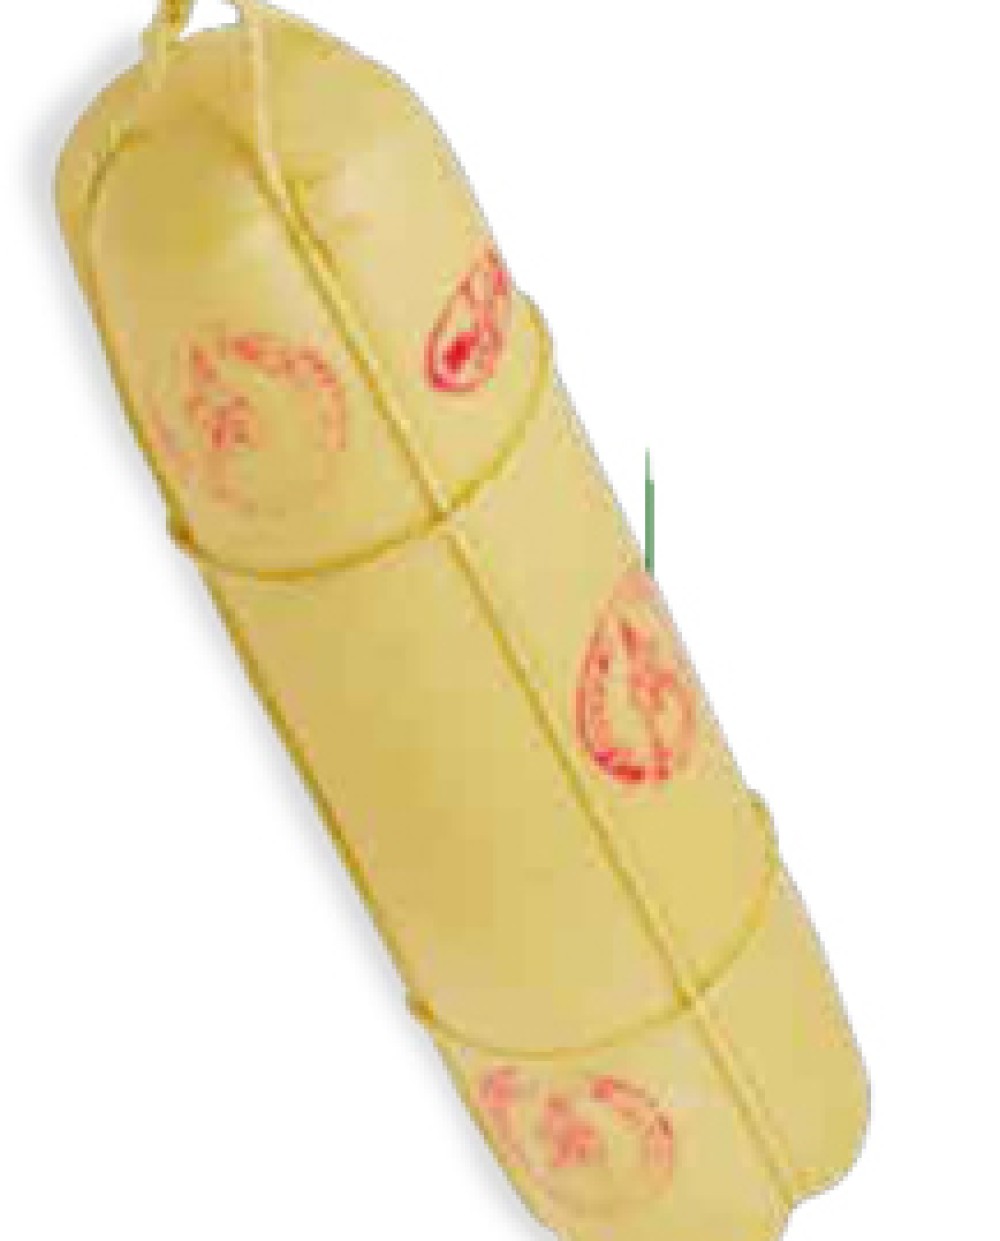 PROVOLONE DOLCE 5kg